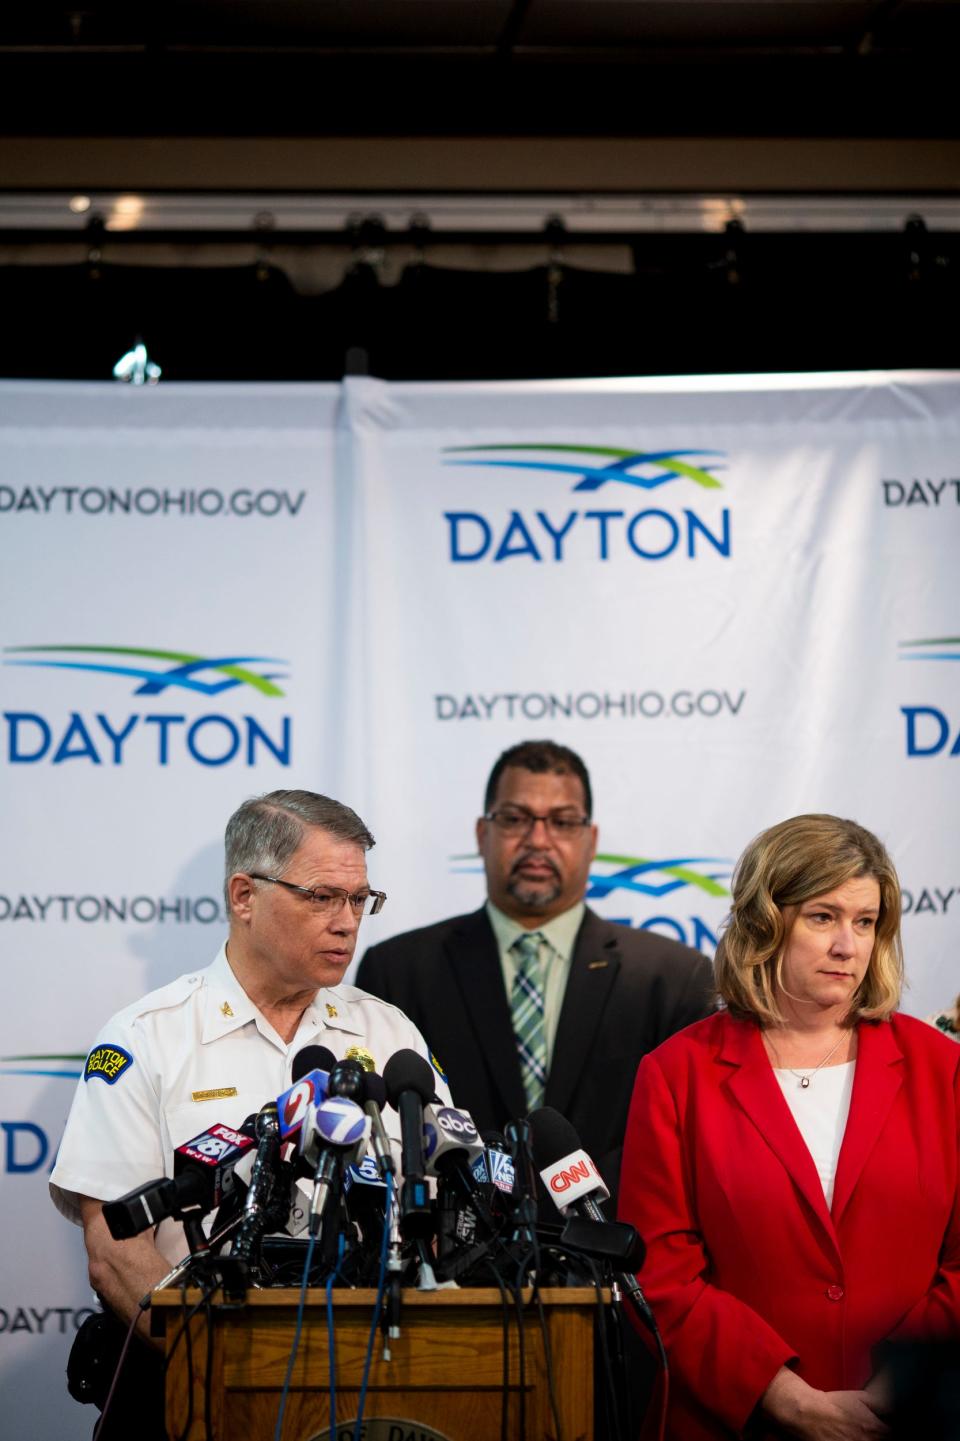 Dayton Police Chief Richard Biehl and Dayton Mayor Nan Whaley answer questions at a press conference at the Dayton Convention Center Monday, August 5, 2019, the day after a gunman killed nine people and injured 27.